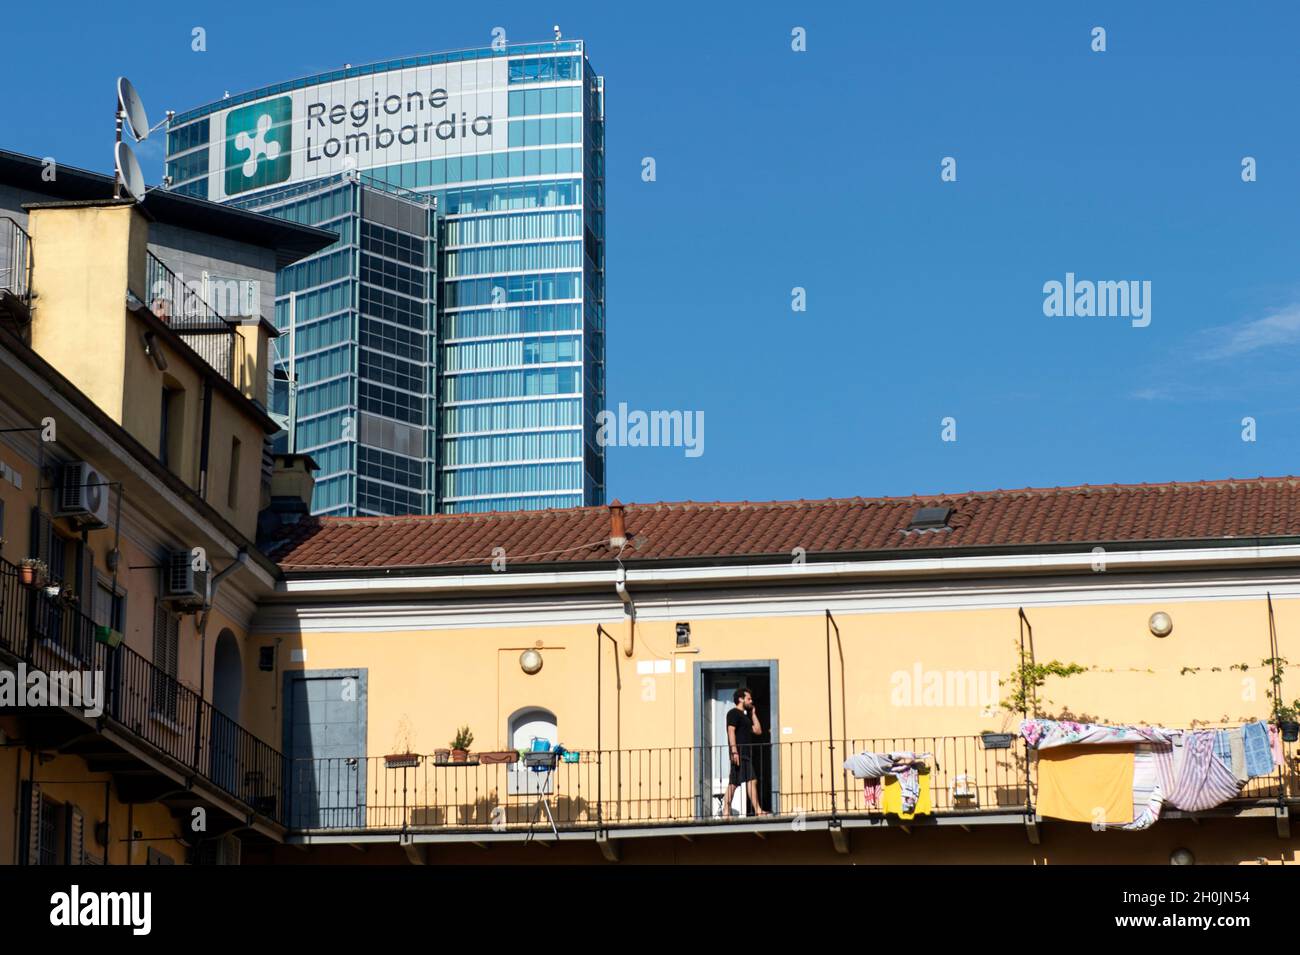 Italy, Lombardy, Milan, Isola district with Regione Lombardia headquarter building Stock Photo